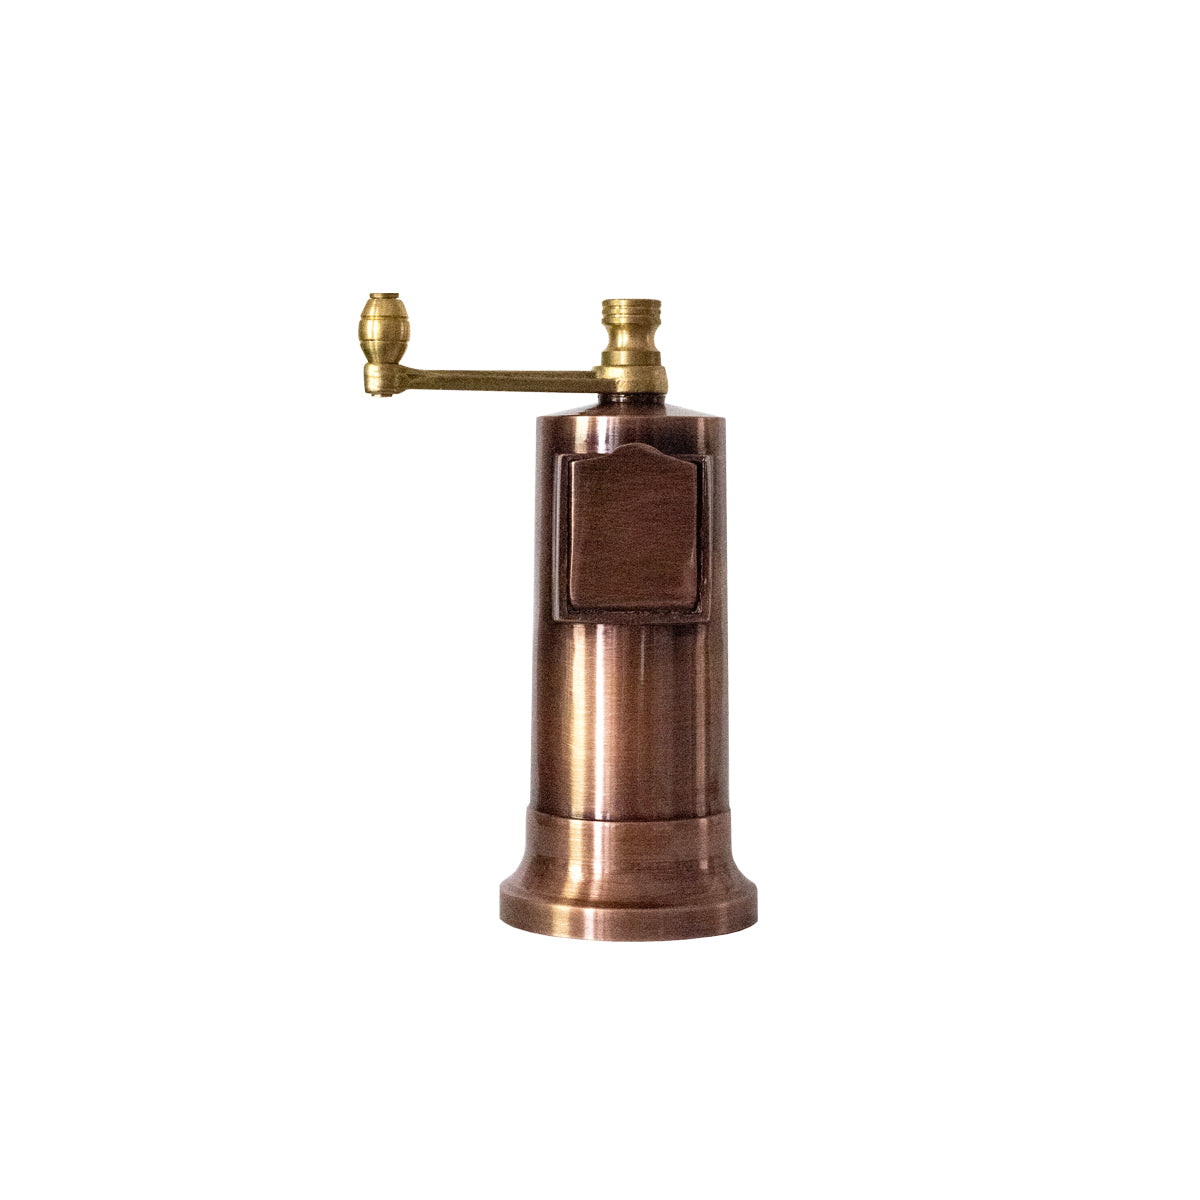 Small Pocket Pepper Mill 3” Brass Vintage Style - Paykoc Imports, Inc.